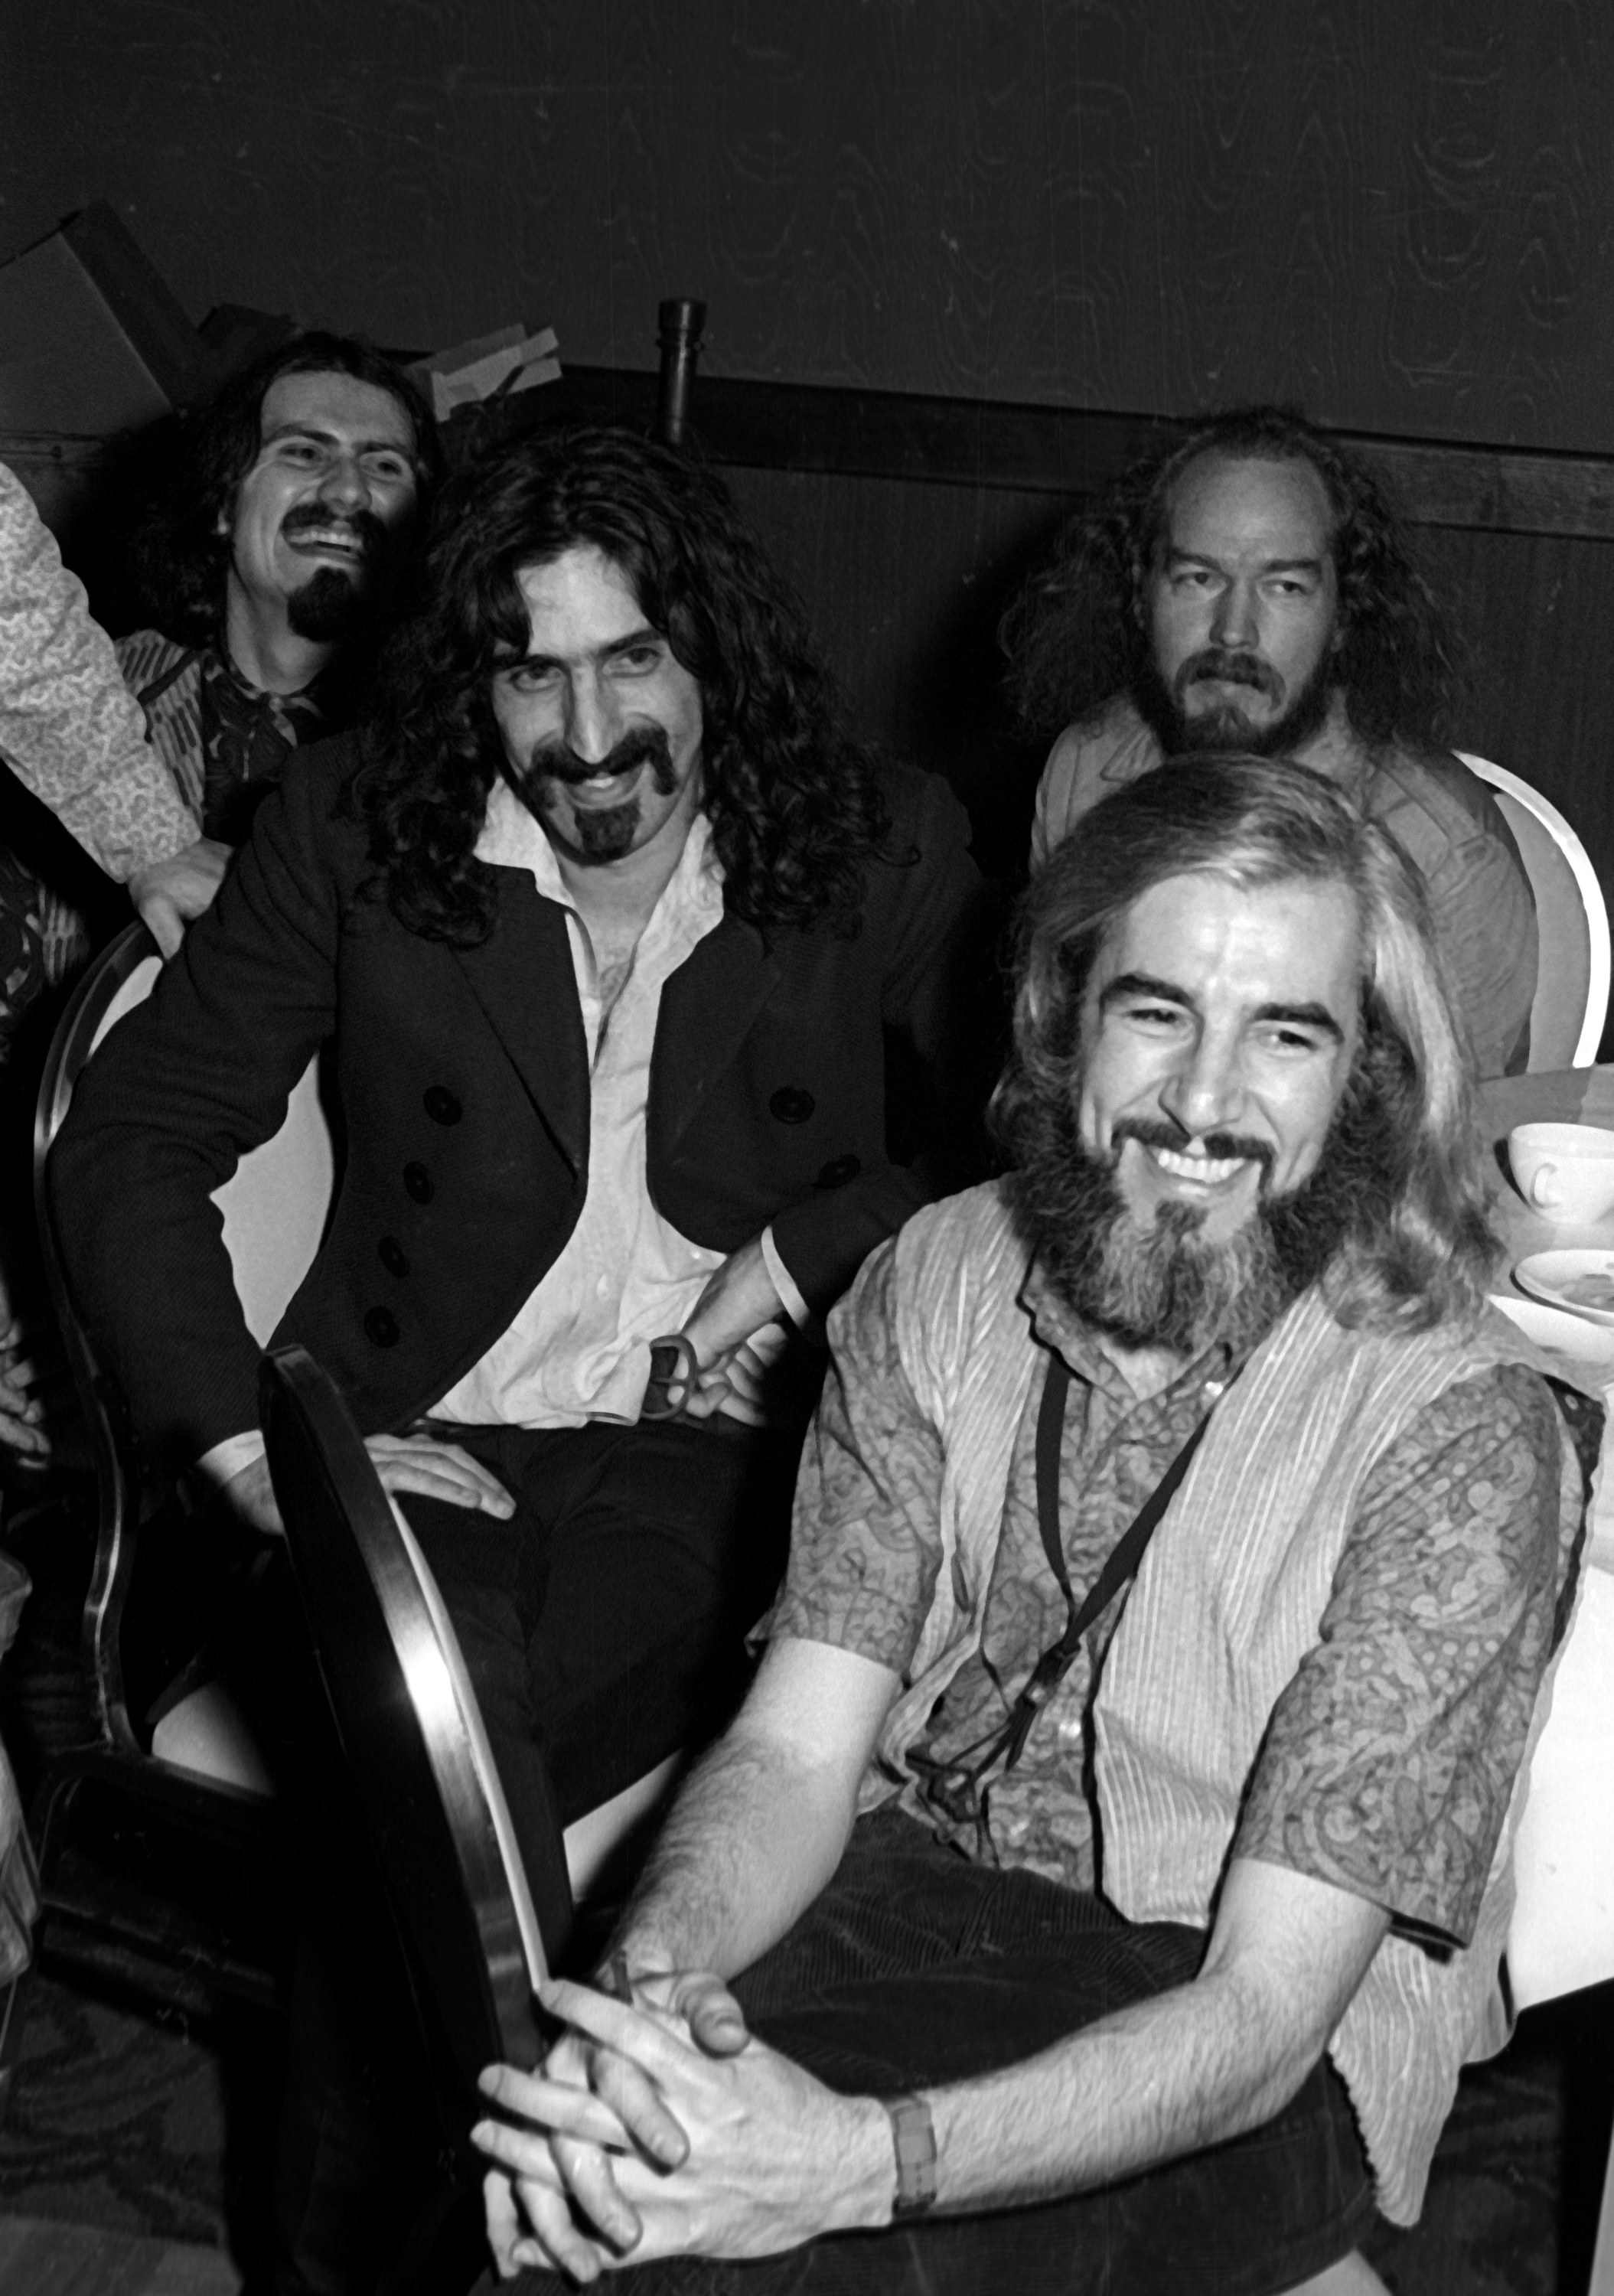 Frank Zappa and the Mothers of Invention attend 10th Annual Grammy Awards on February 29, 1968, at the New York Hilton Hotel